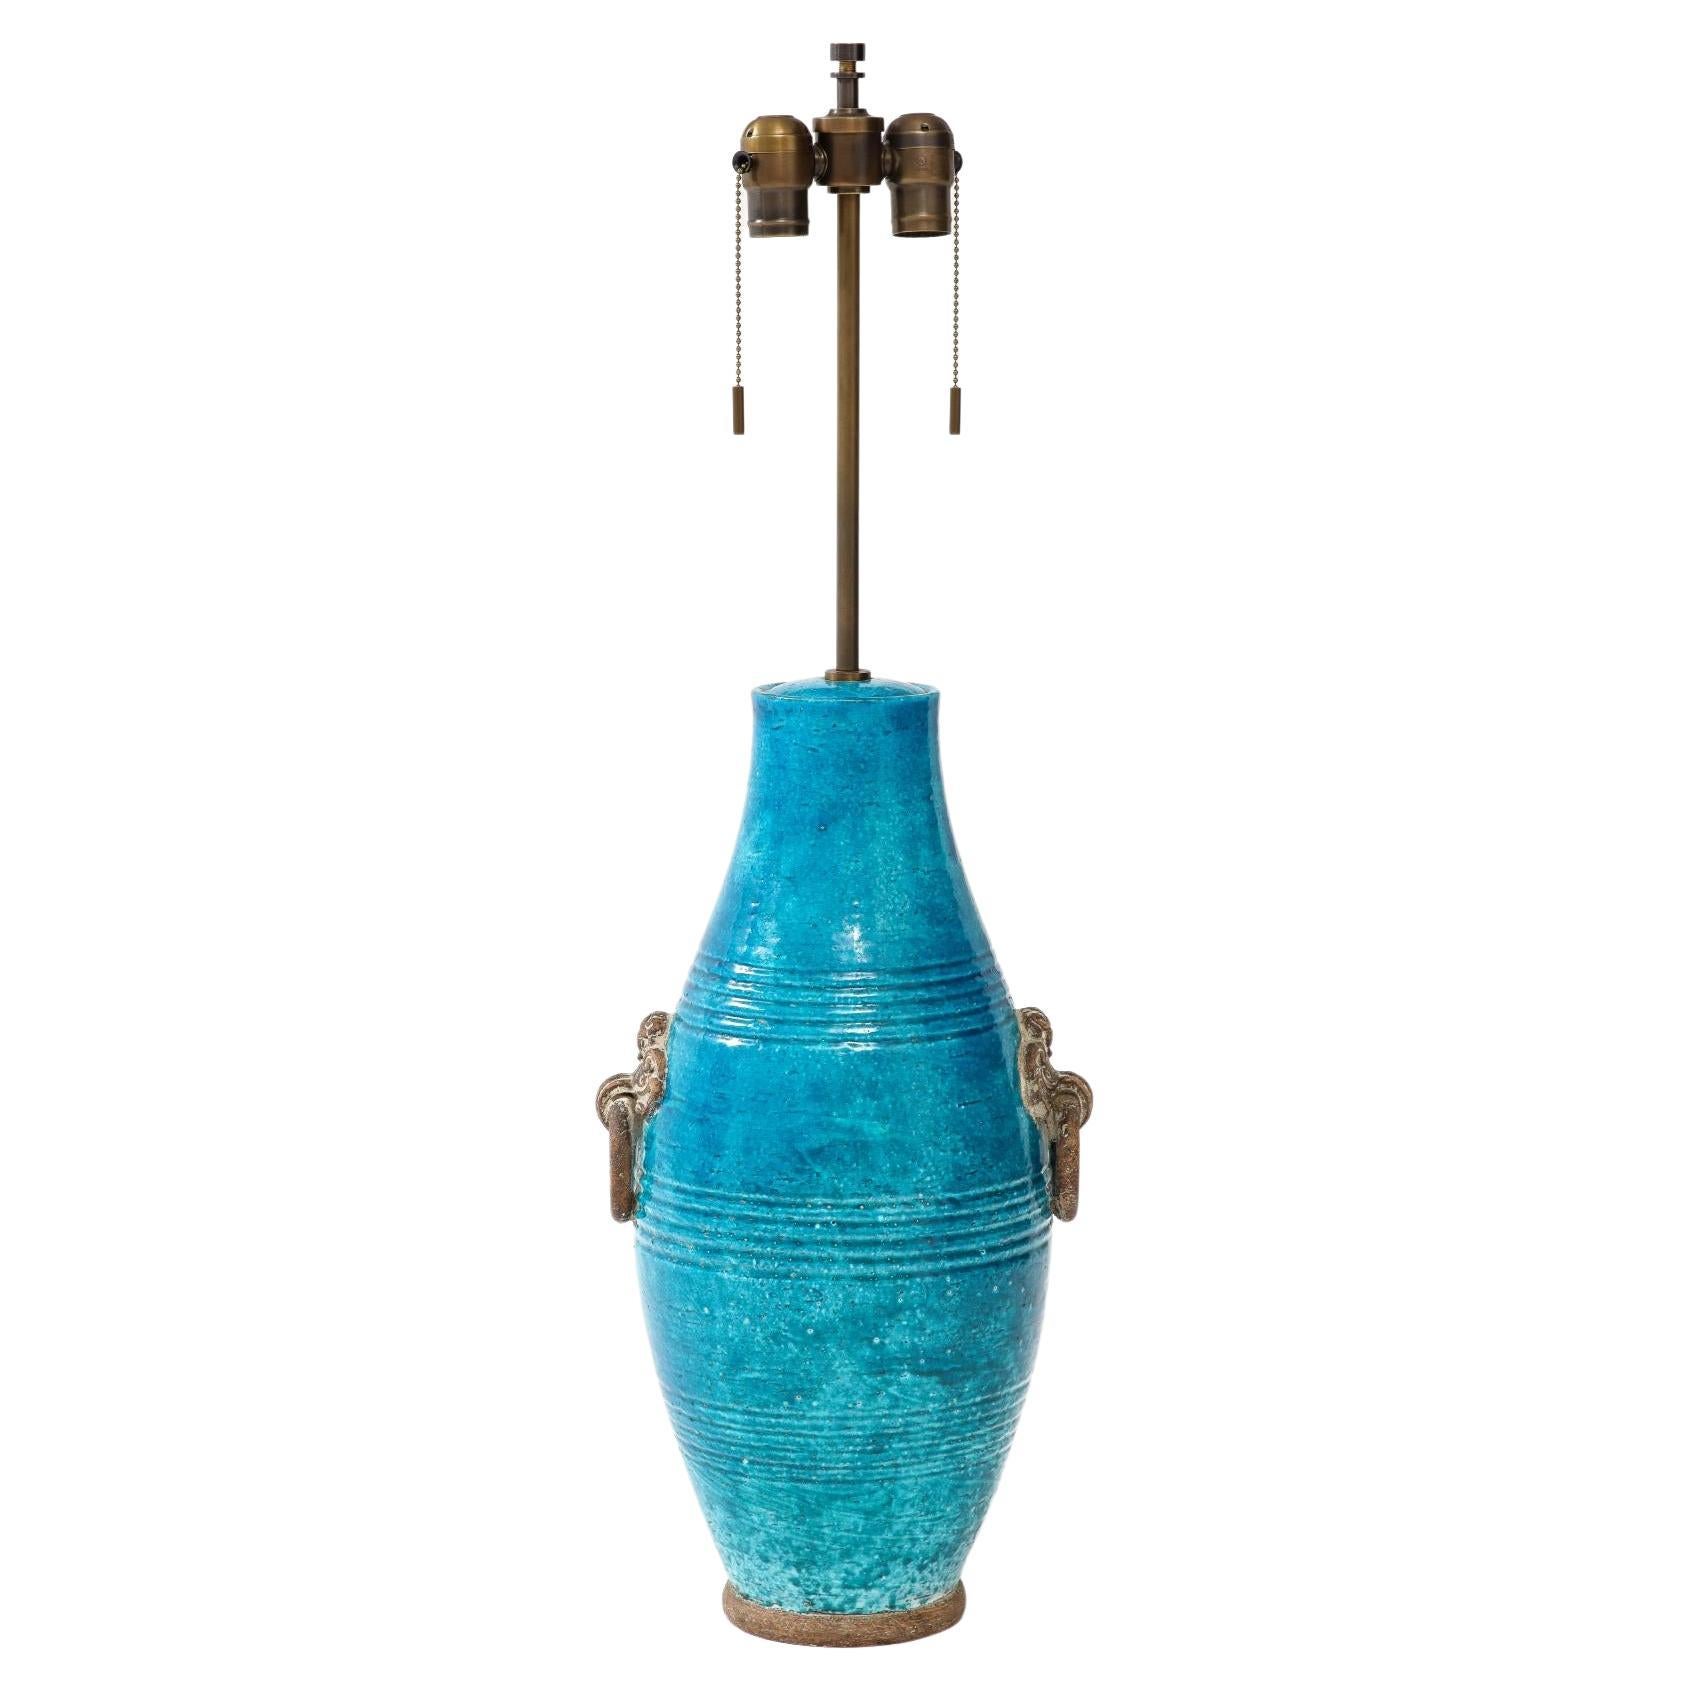 Brass and Glazed Stoneware Monumental Table Lamp by Ugo Zaccagnini, c. 1950 For Sale